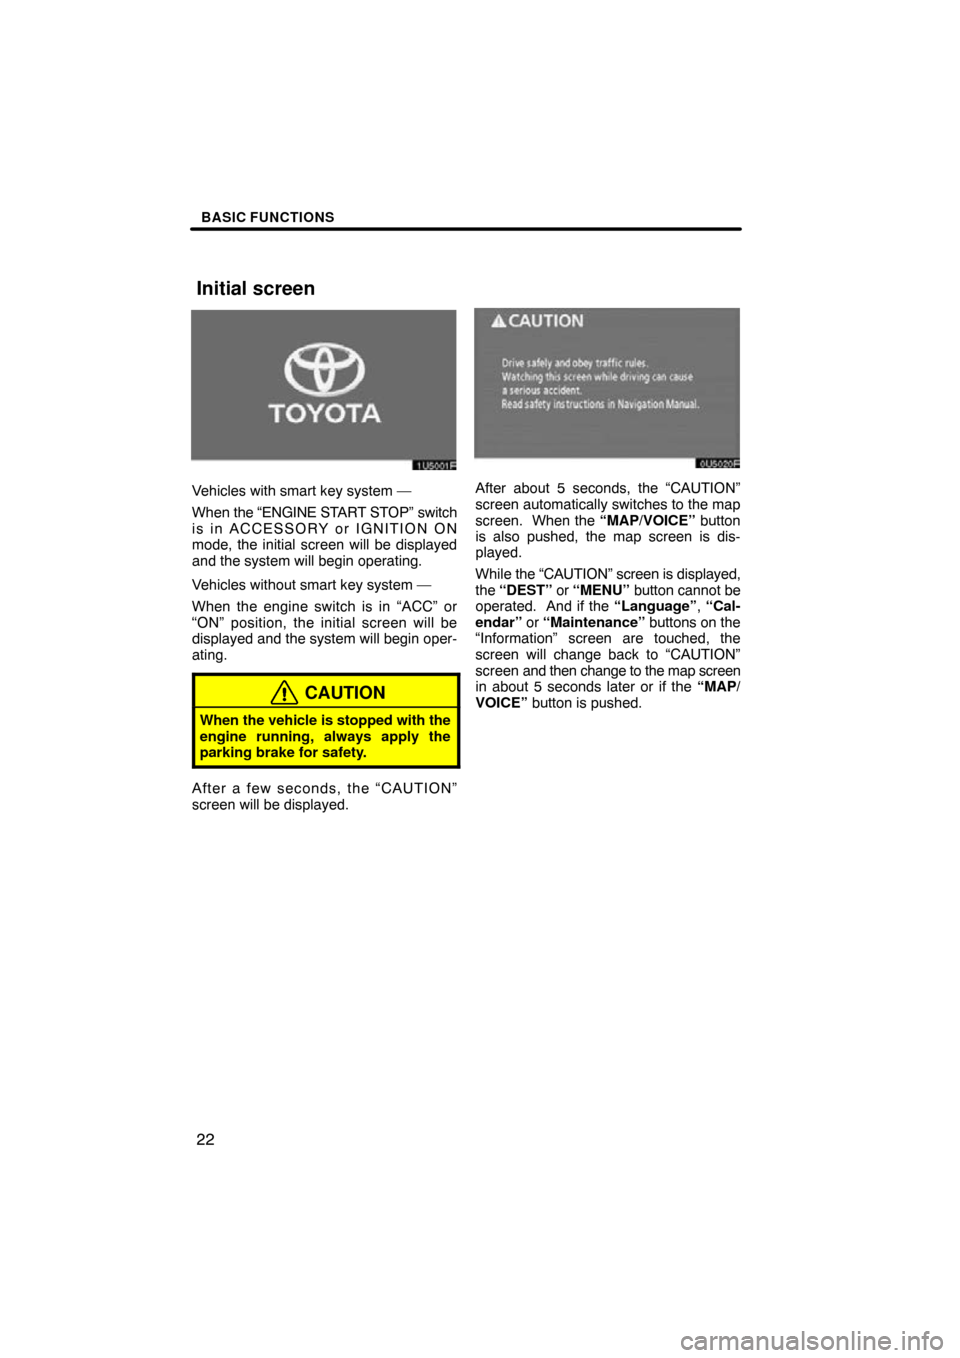 TOYOTA HIGHLANDER 2009 XU40 / 2.G Navigation Manual BASIC FUNCTIONS
22
Vehicles with smart key system —
When the “ENGINE START STOP” switch
is in ACCESSORY or IGNITION ON
mode, the initial screen will be displayed
and the system will begin operat